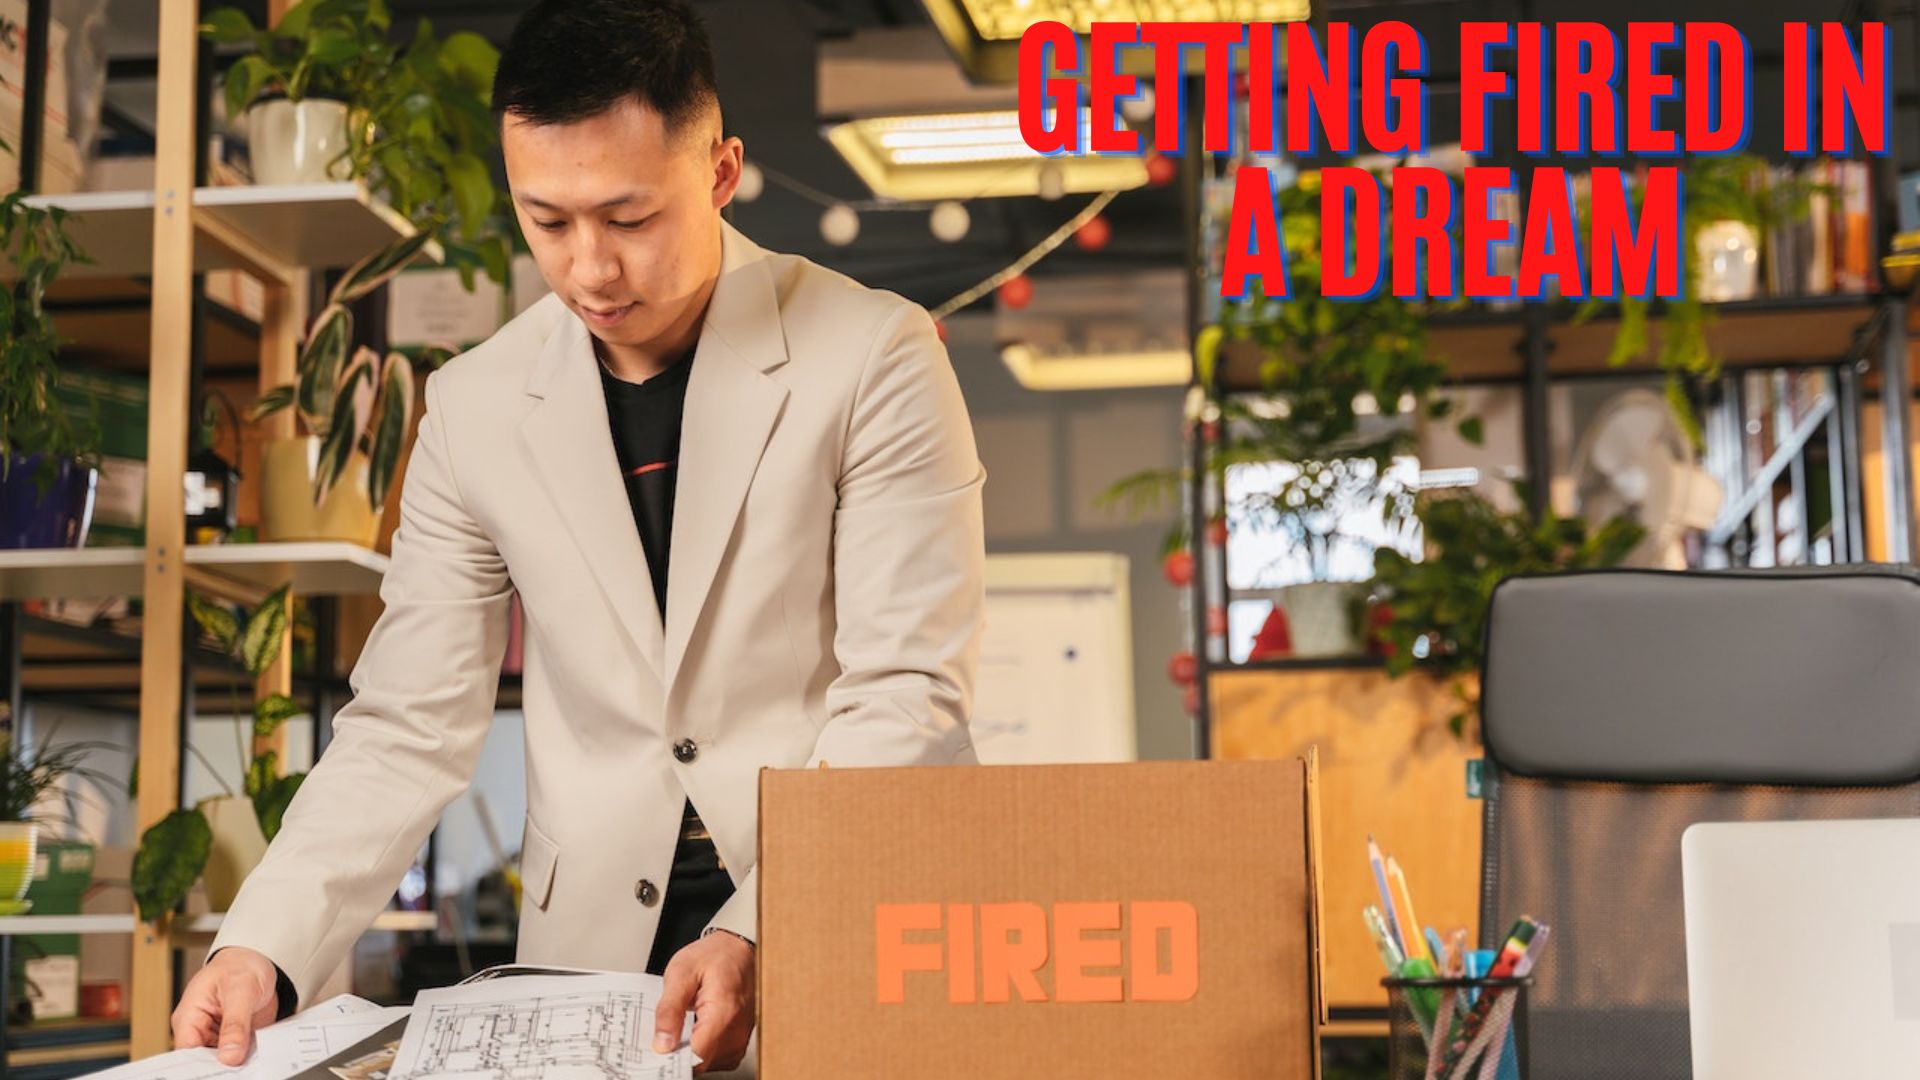 Getting Fired In A Dream - A Sign Of Dissatisfaction